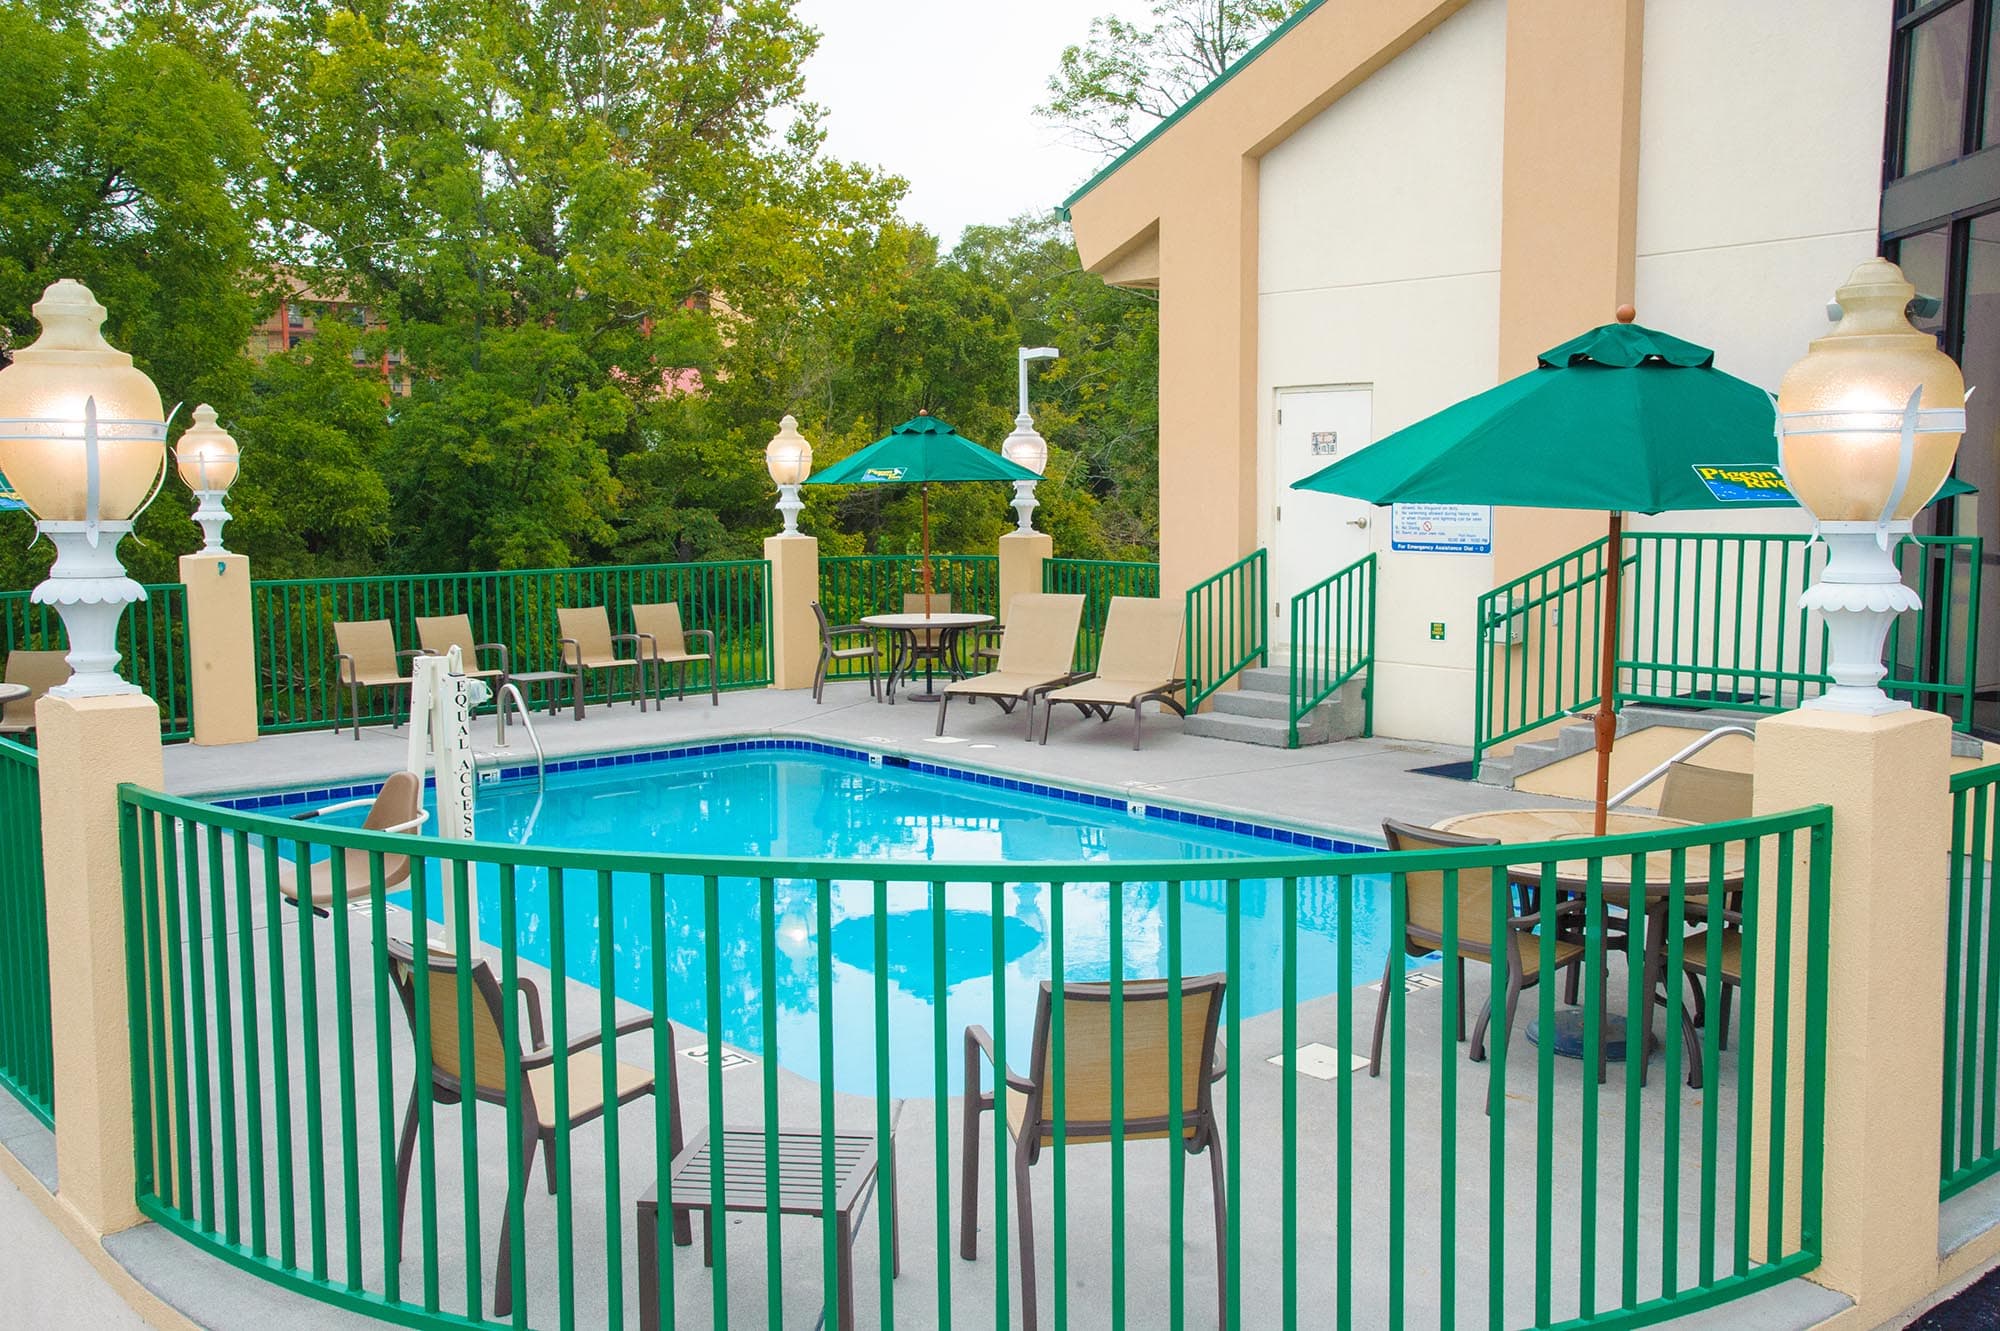 Curved railings surround pool for protection